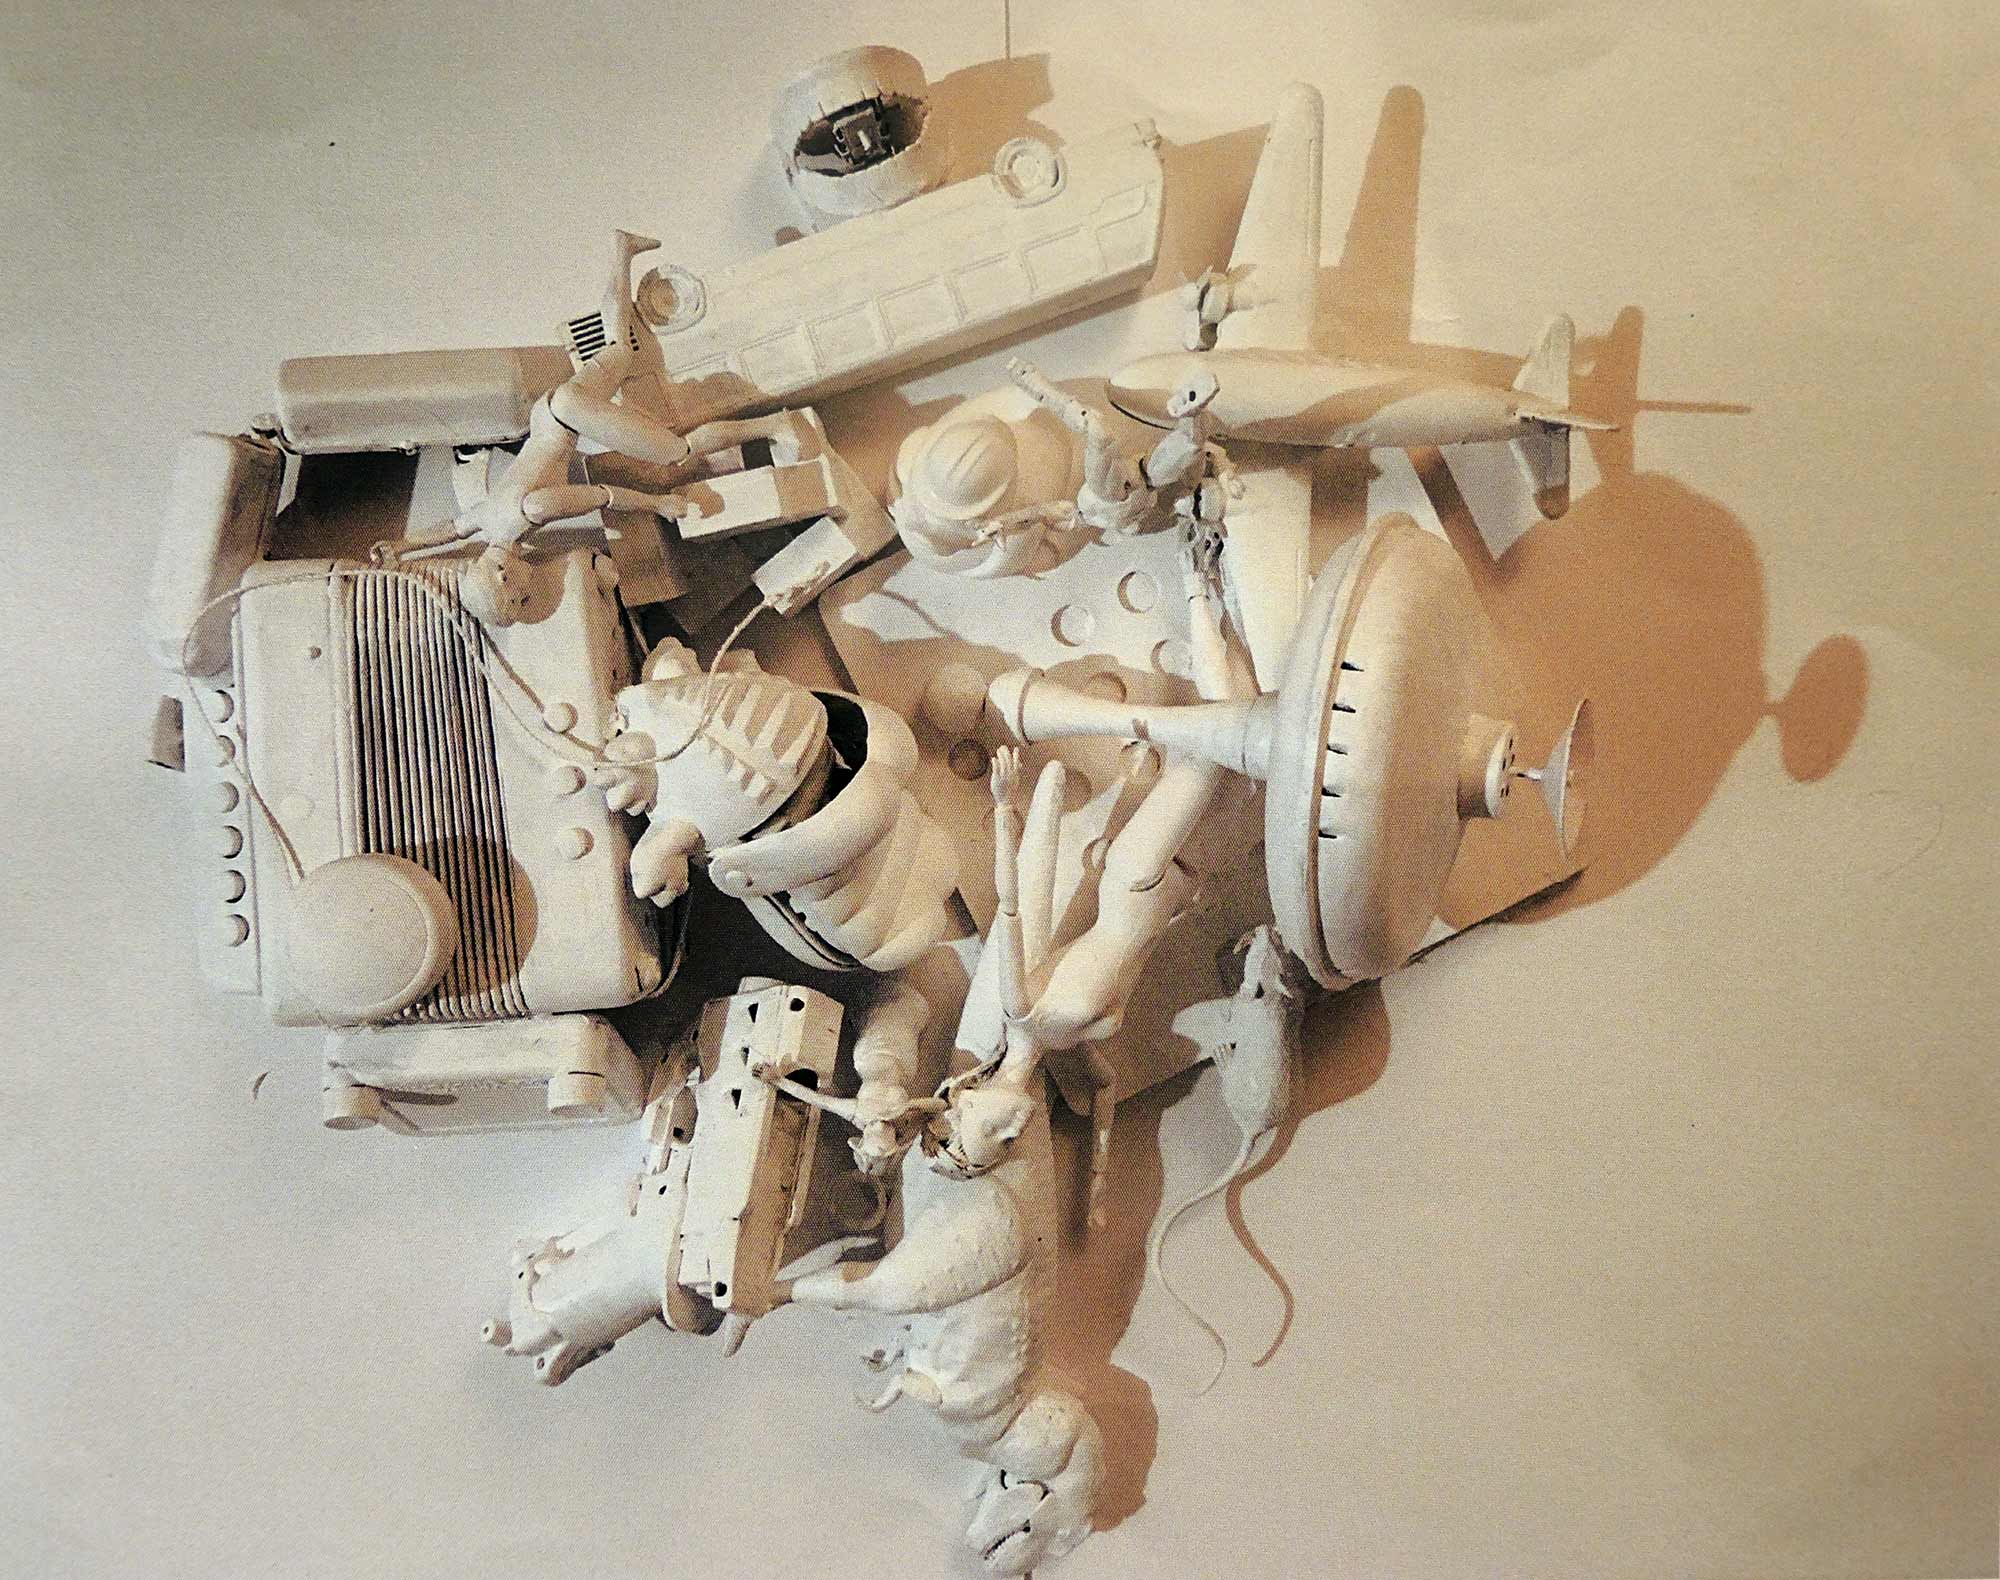 A sculpture of arranged objects